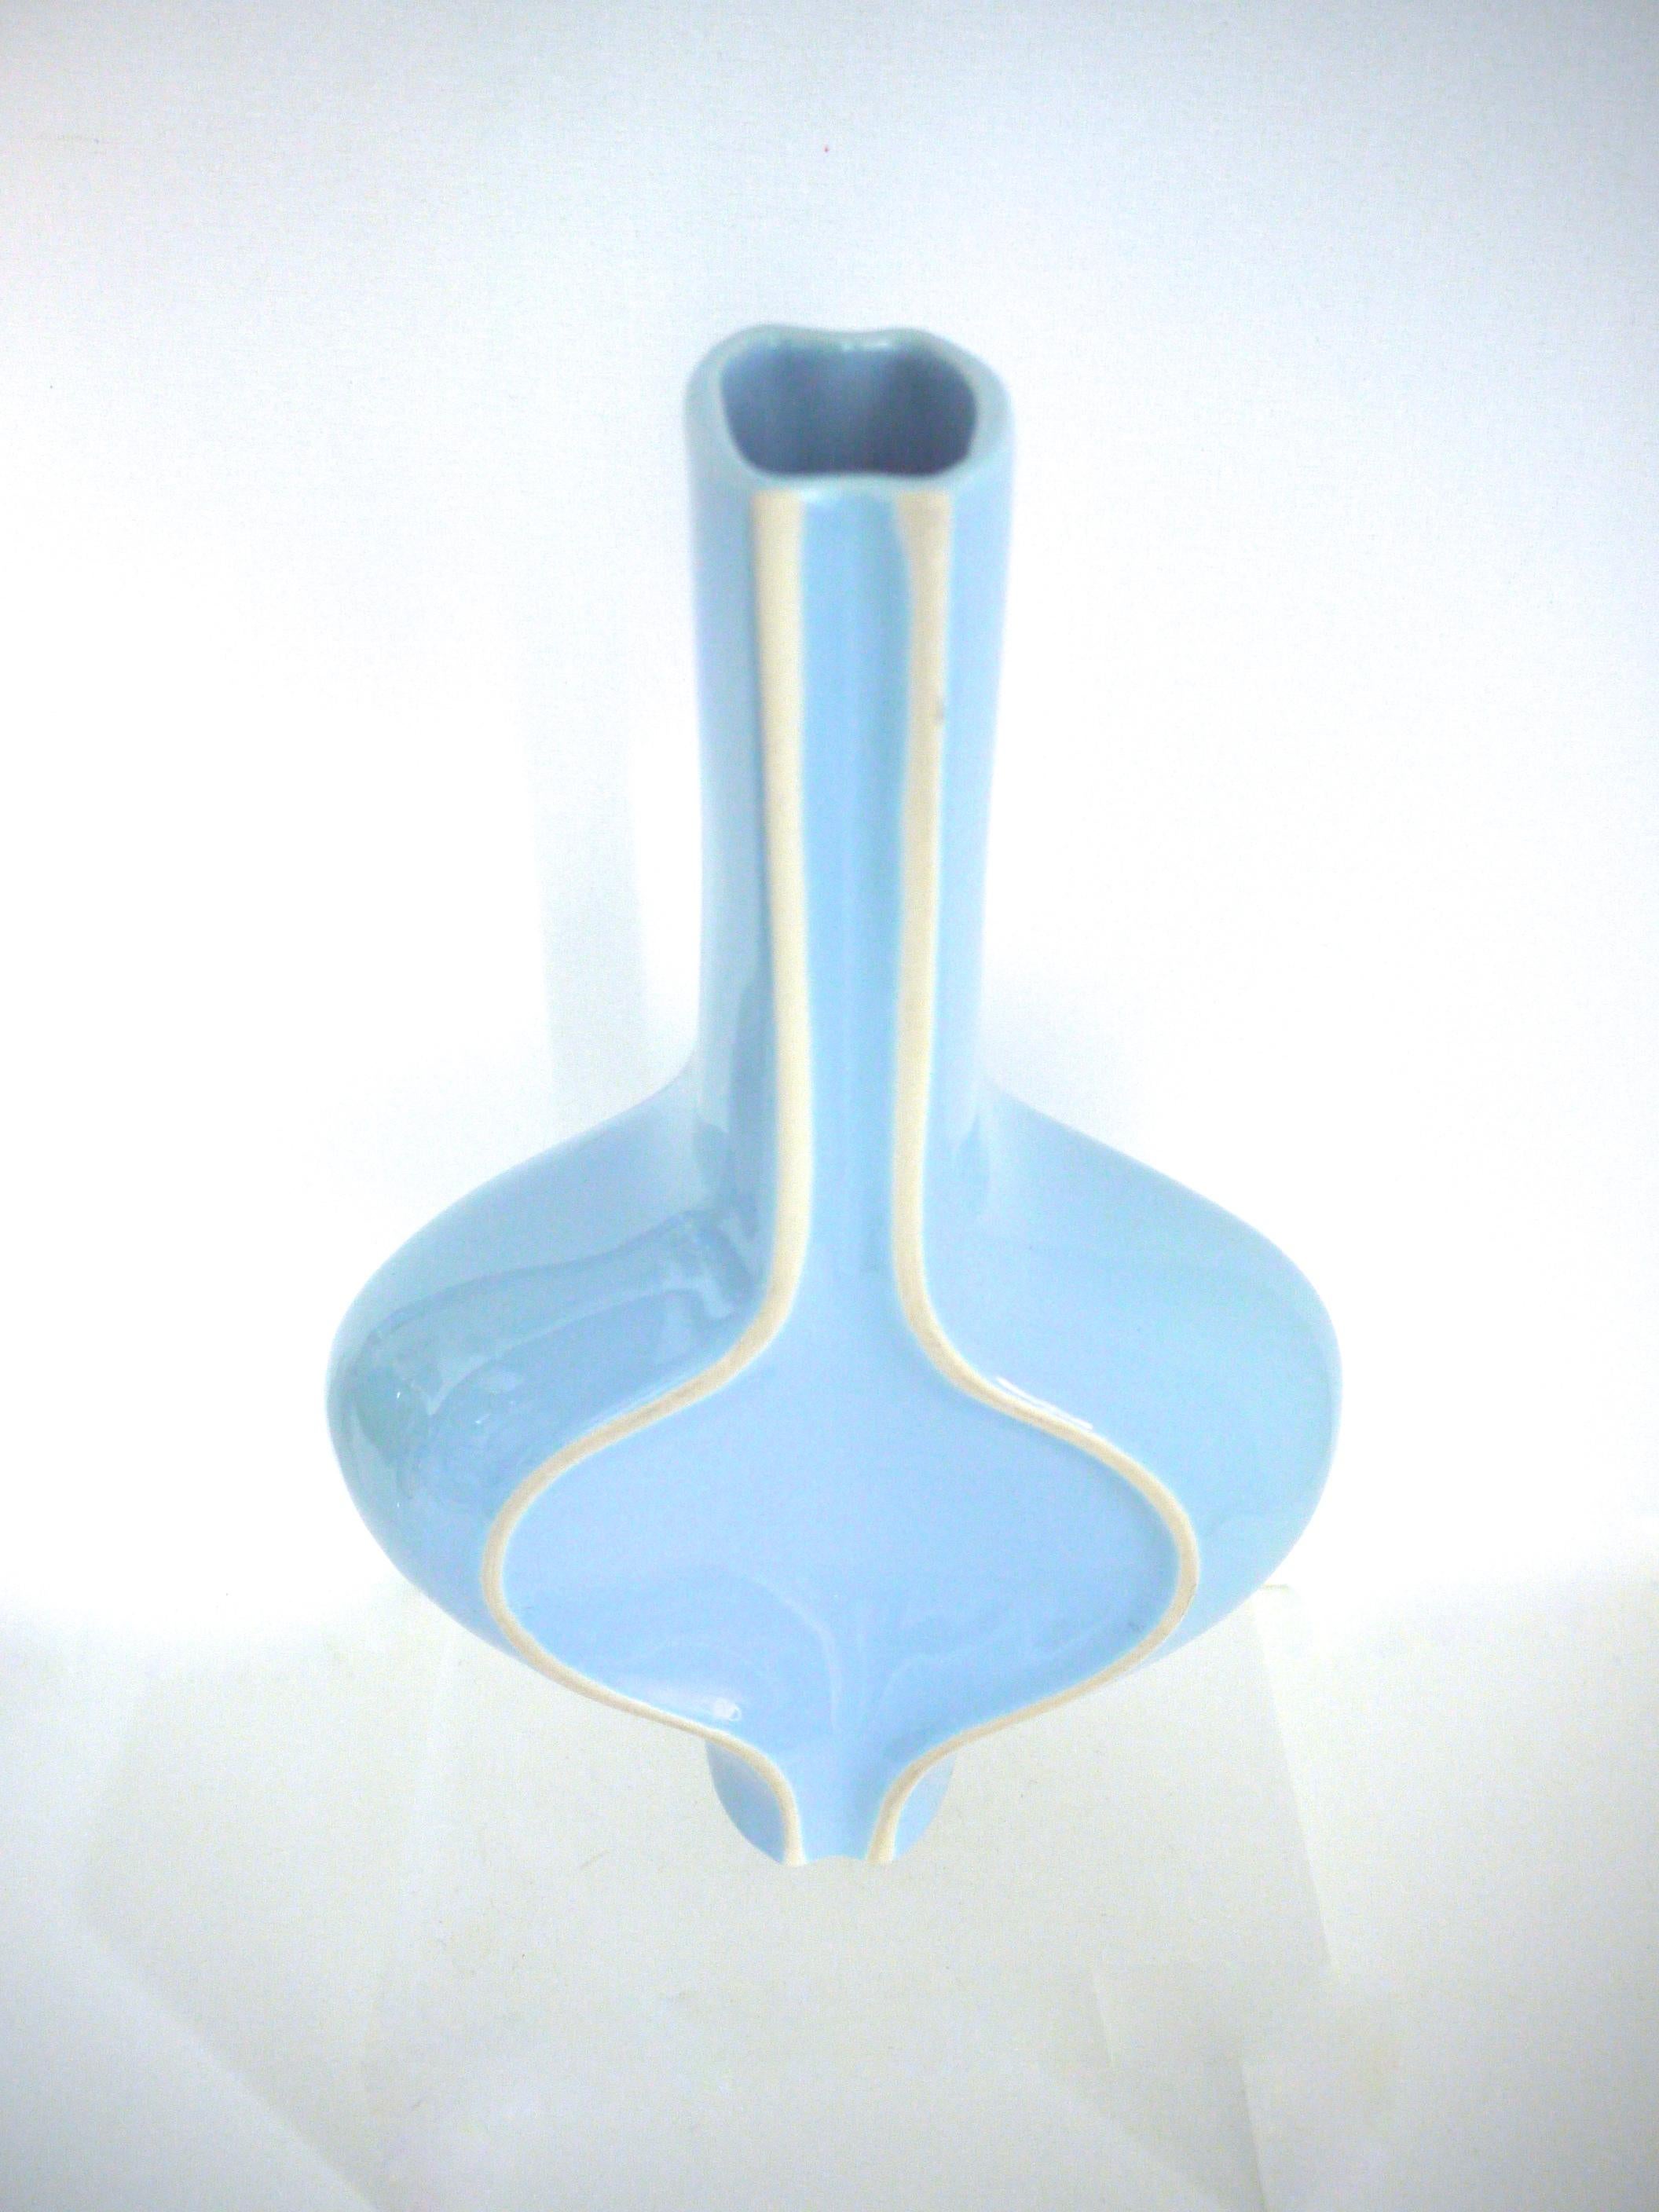 Sought after, Space Age China Swallow Vase by Scabetti Dominic Bromley, 2002 UK In Good Condition For Sale In Halstead, GB